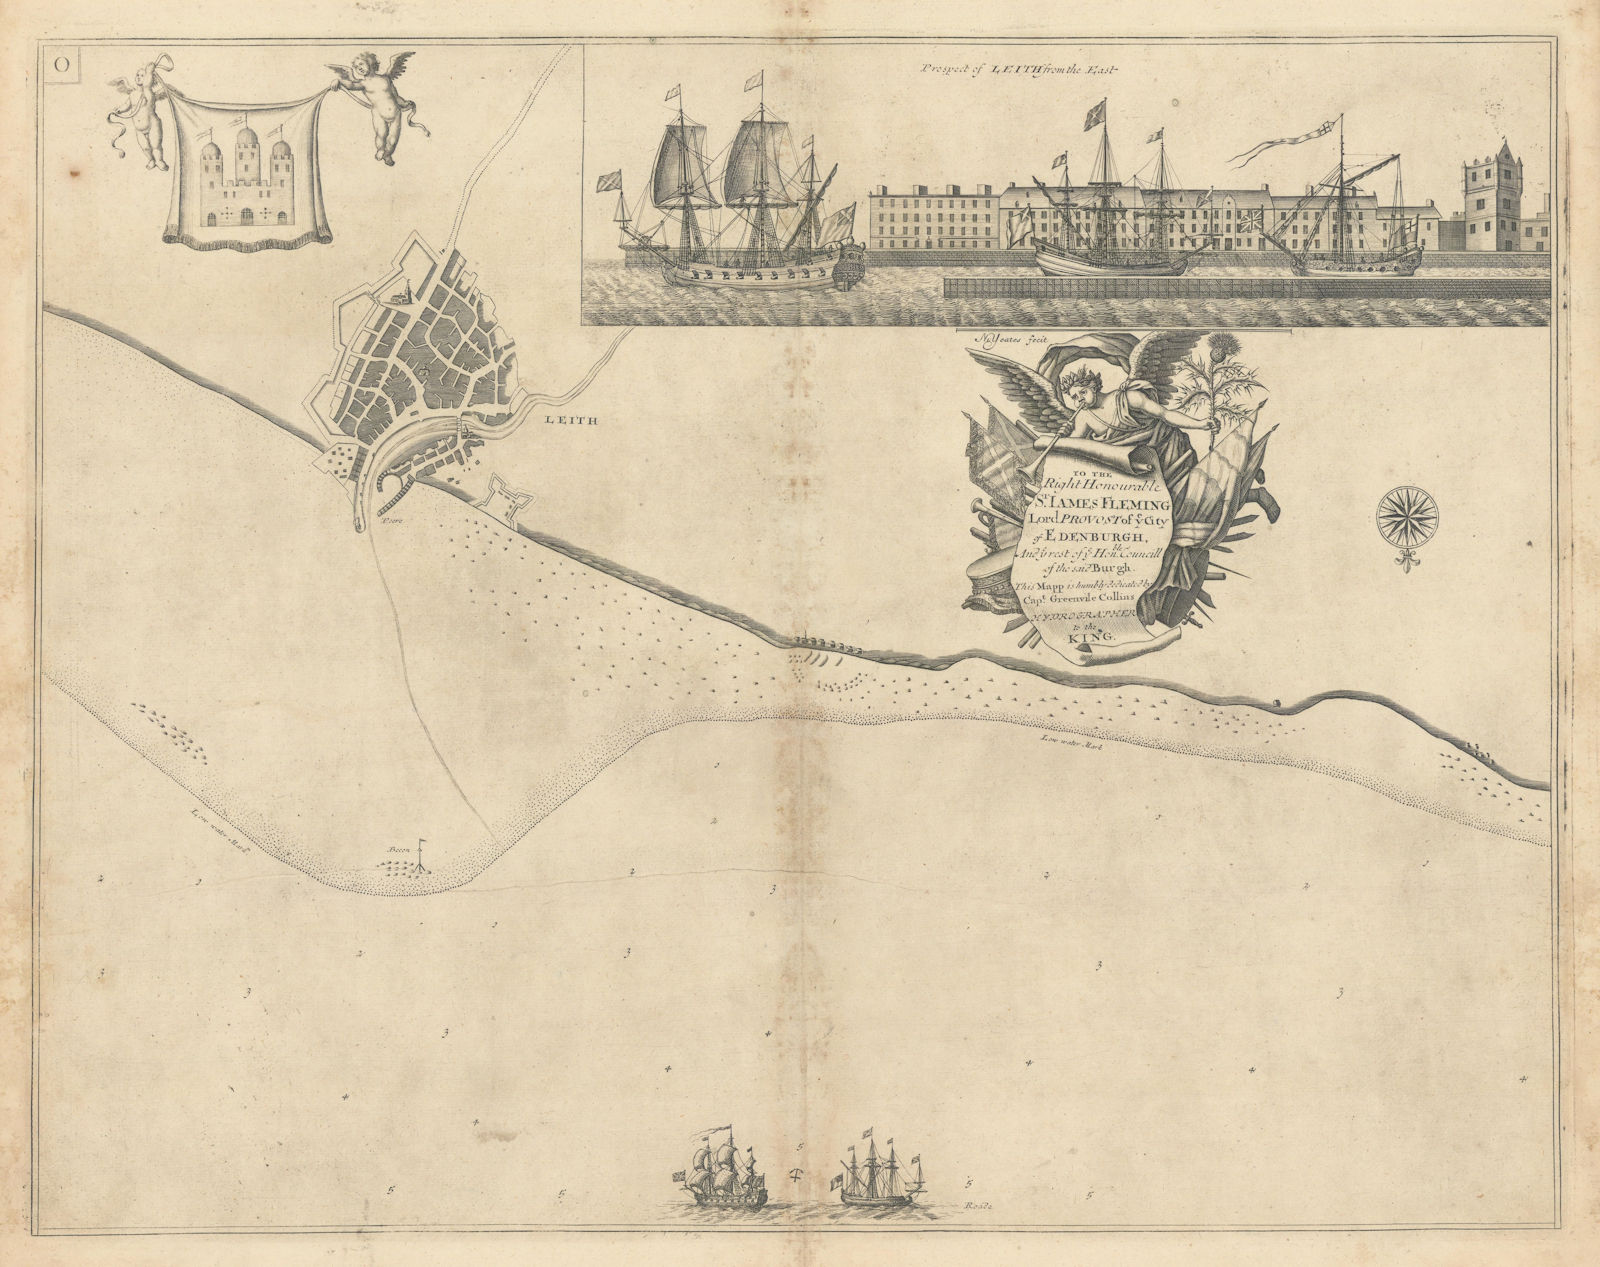 Navigation chart & view of LEITH, by Capt Greenvile COLLINS. Edinburgh 1723 map